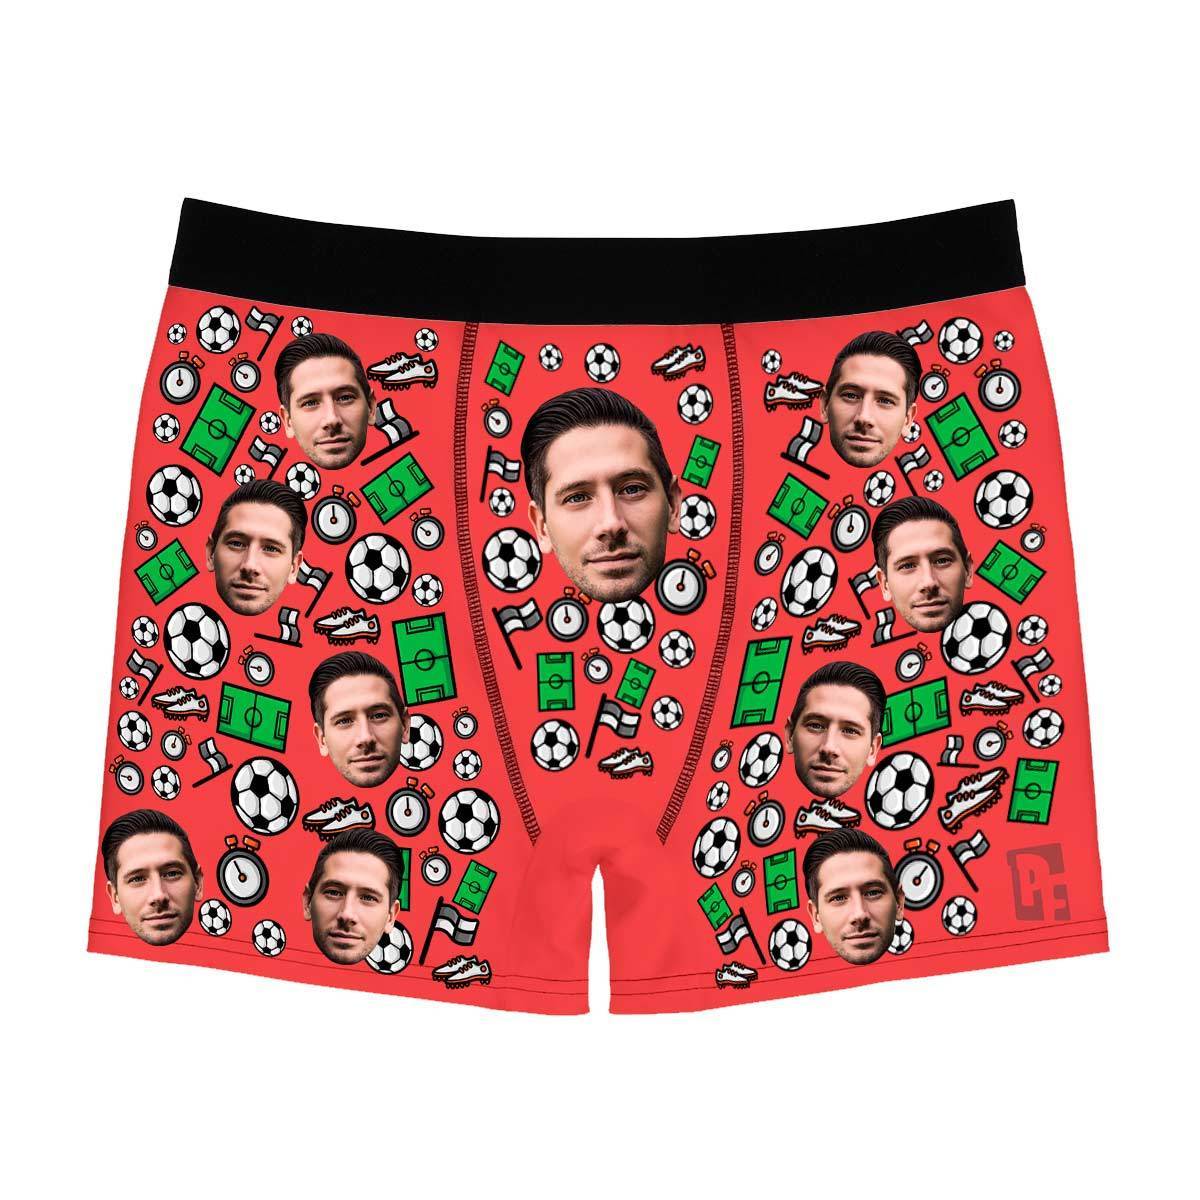 Red Football men's boxer briefs personalized with photo printed on them